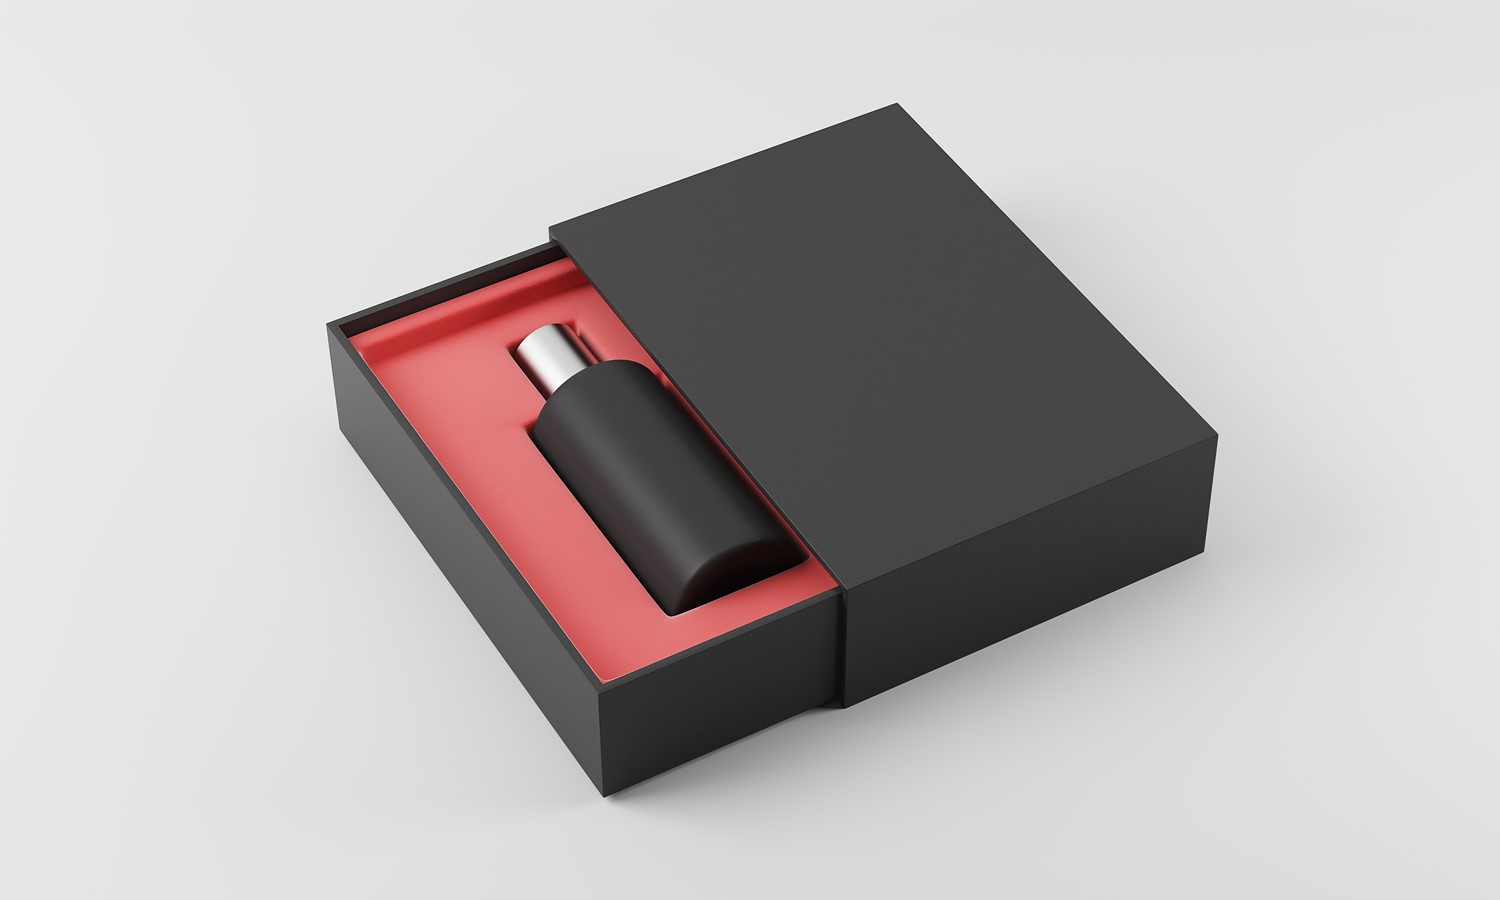 Black Eco-friendly Box Packaging with Refillable Bottle Inside